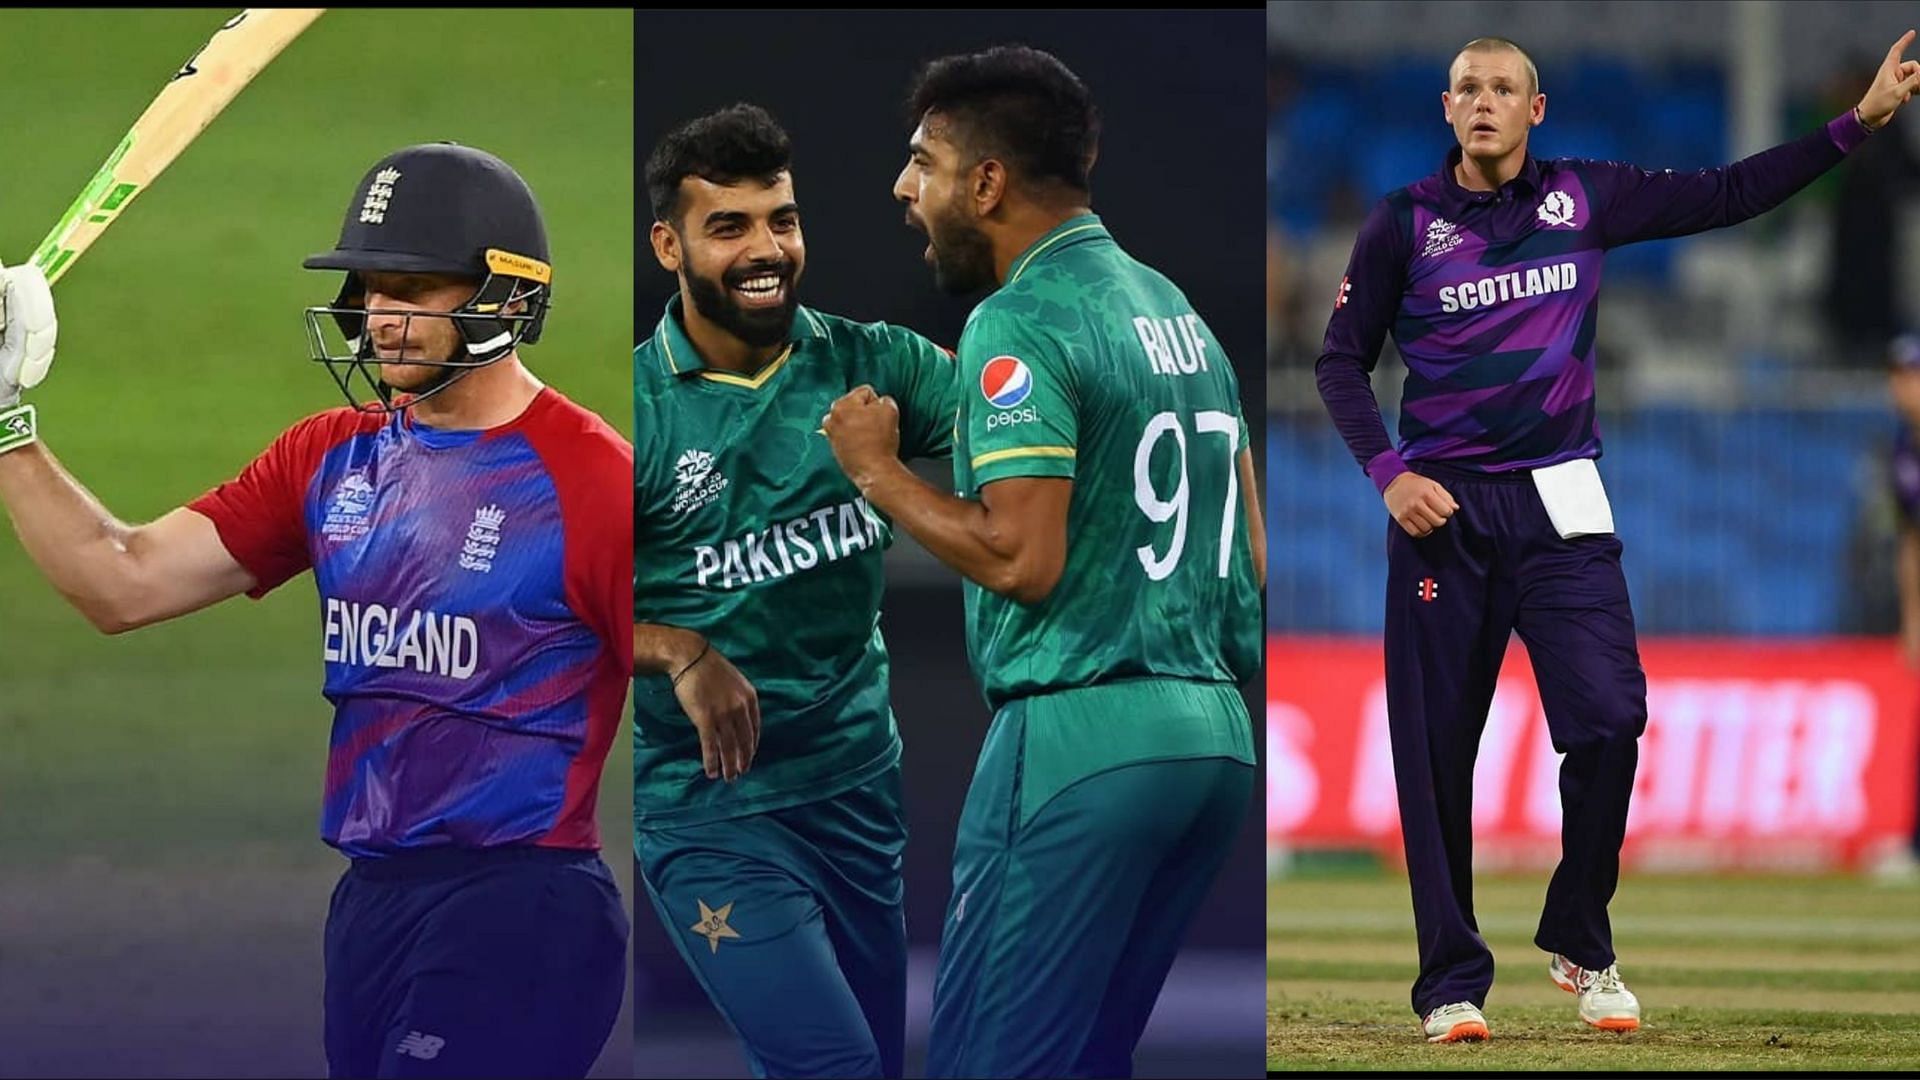 Jos Buttler, Haris Rauf and Michael Leask impressed fans in the ICC T20 World Cup 2021 last week